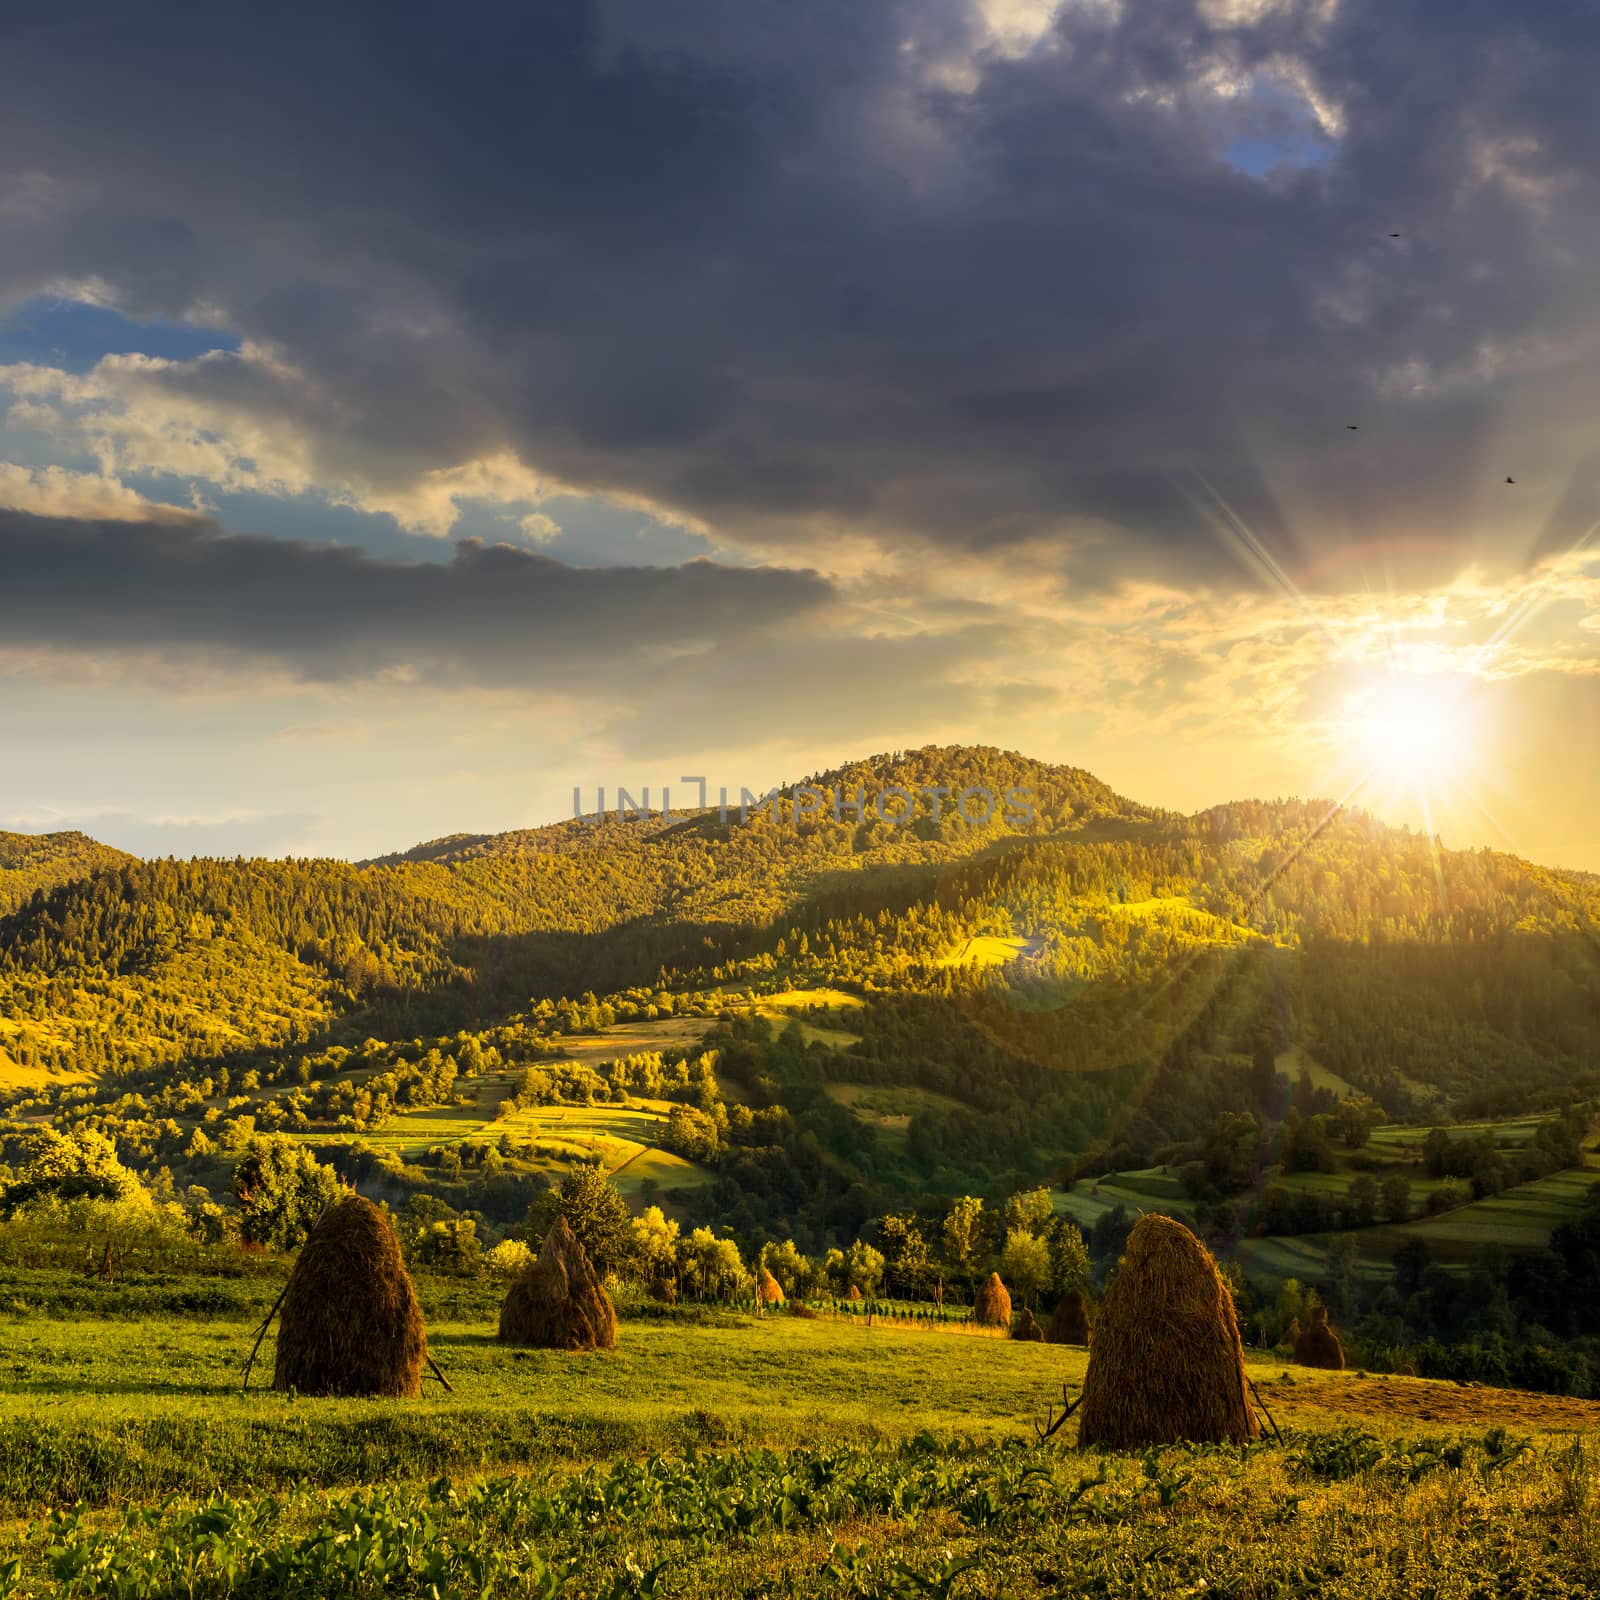 field with haystack on hillside at sunset by Pellinni